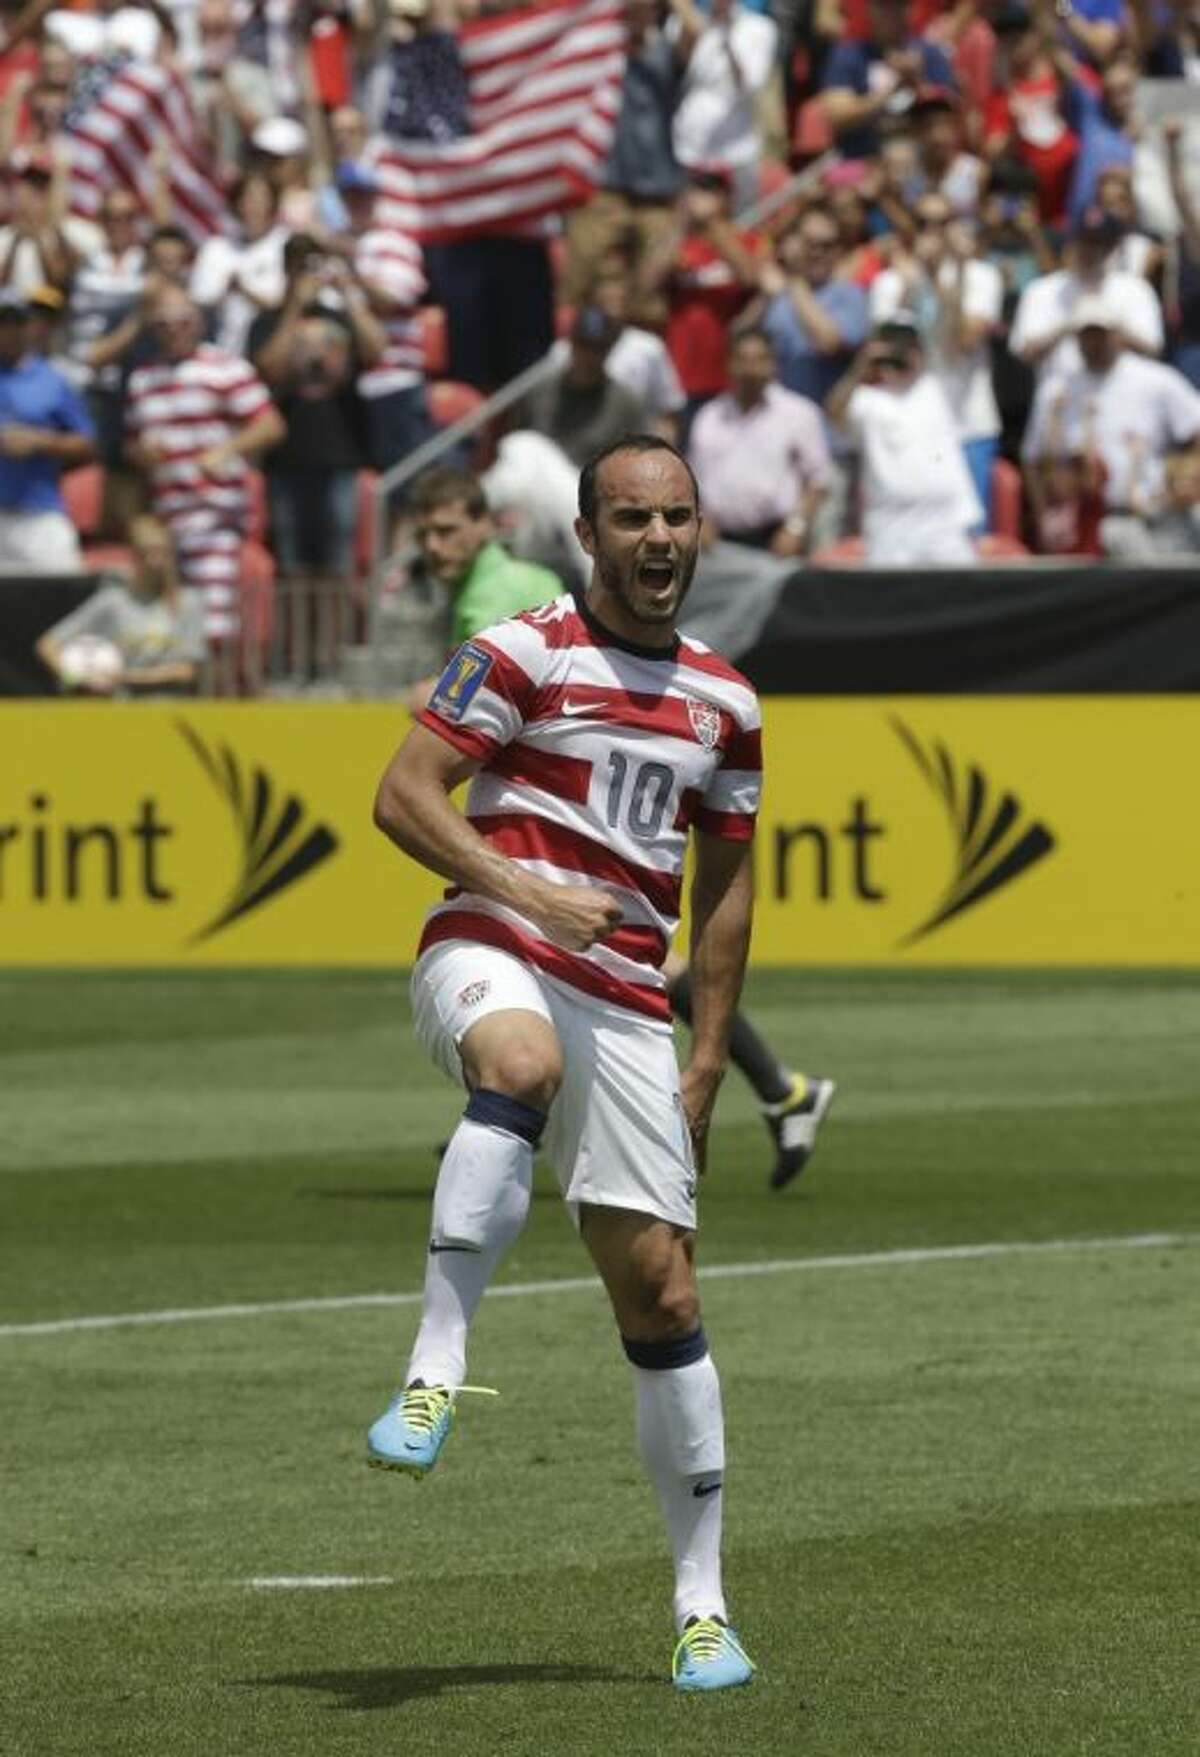 The United States’ Landon Donovan reacts after scoring on a penalty kick during the first half of a CONCACAF Gold Cup match against Cuba on July 13 in Sandy, Utah. The Americans won 4-1.